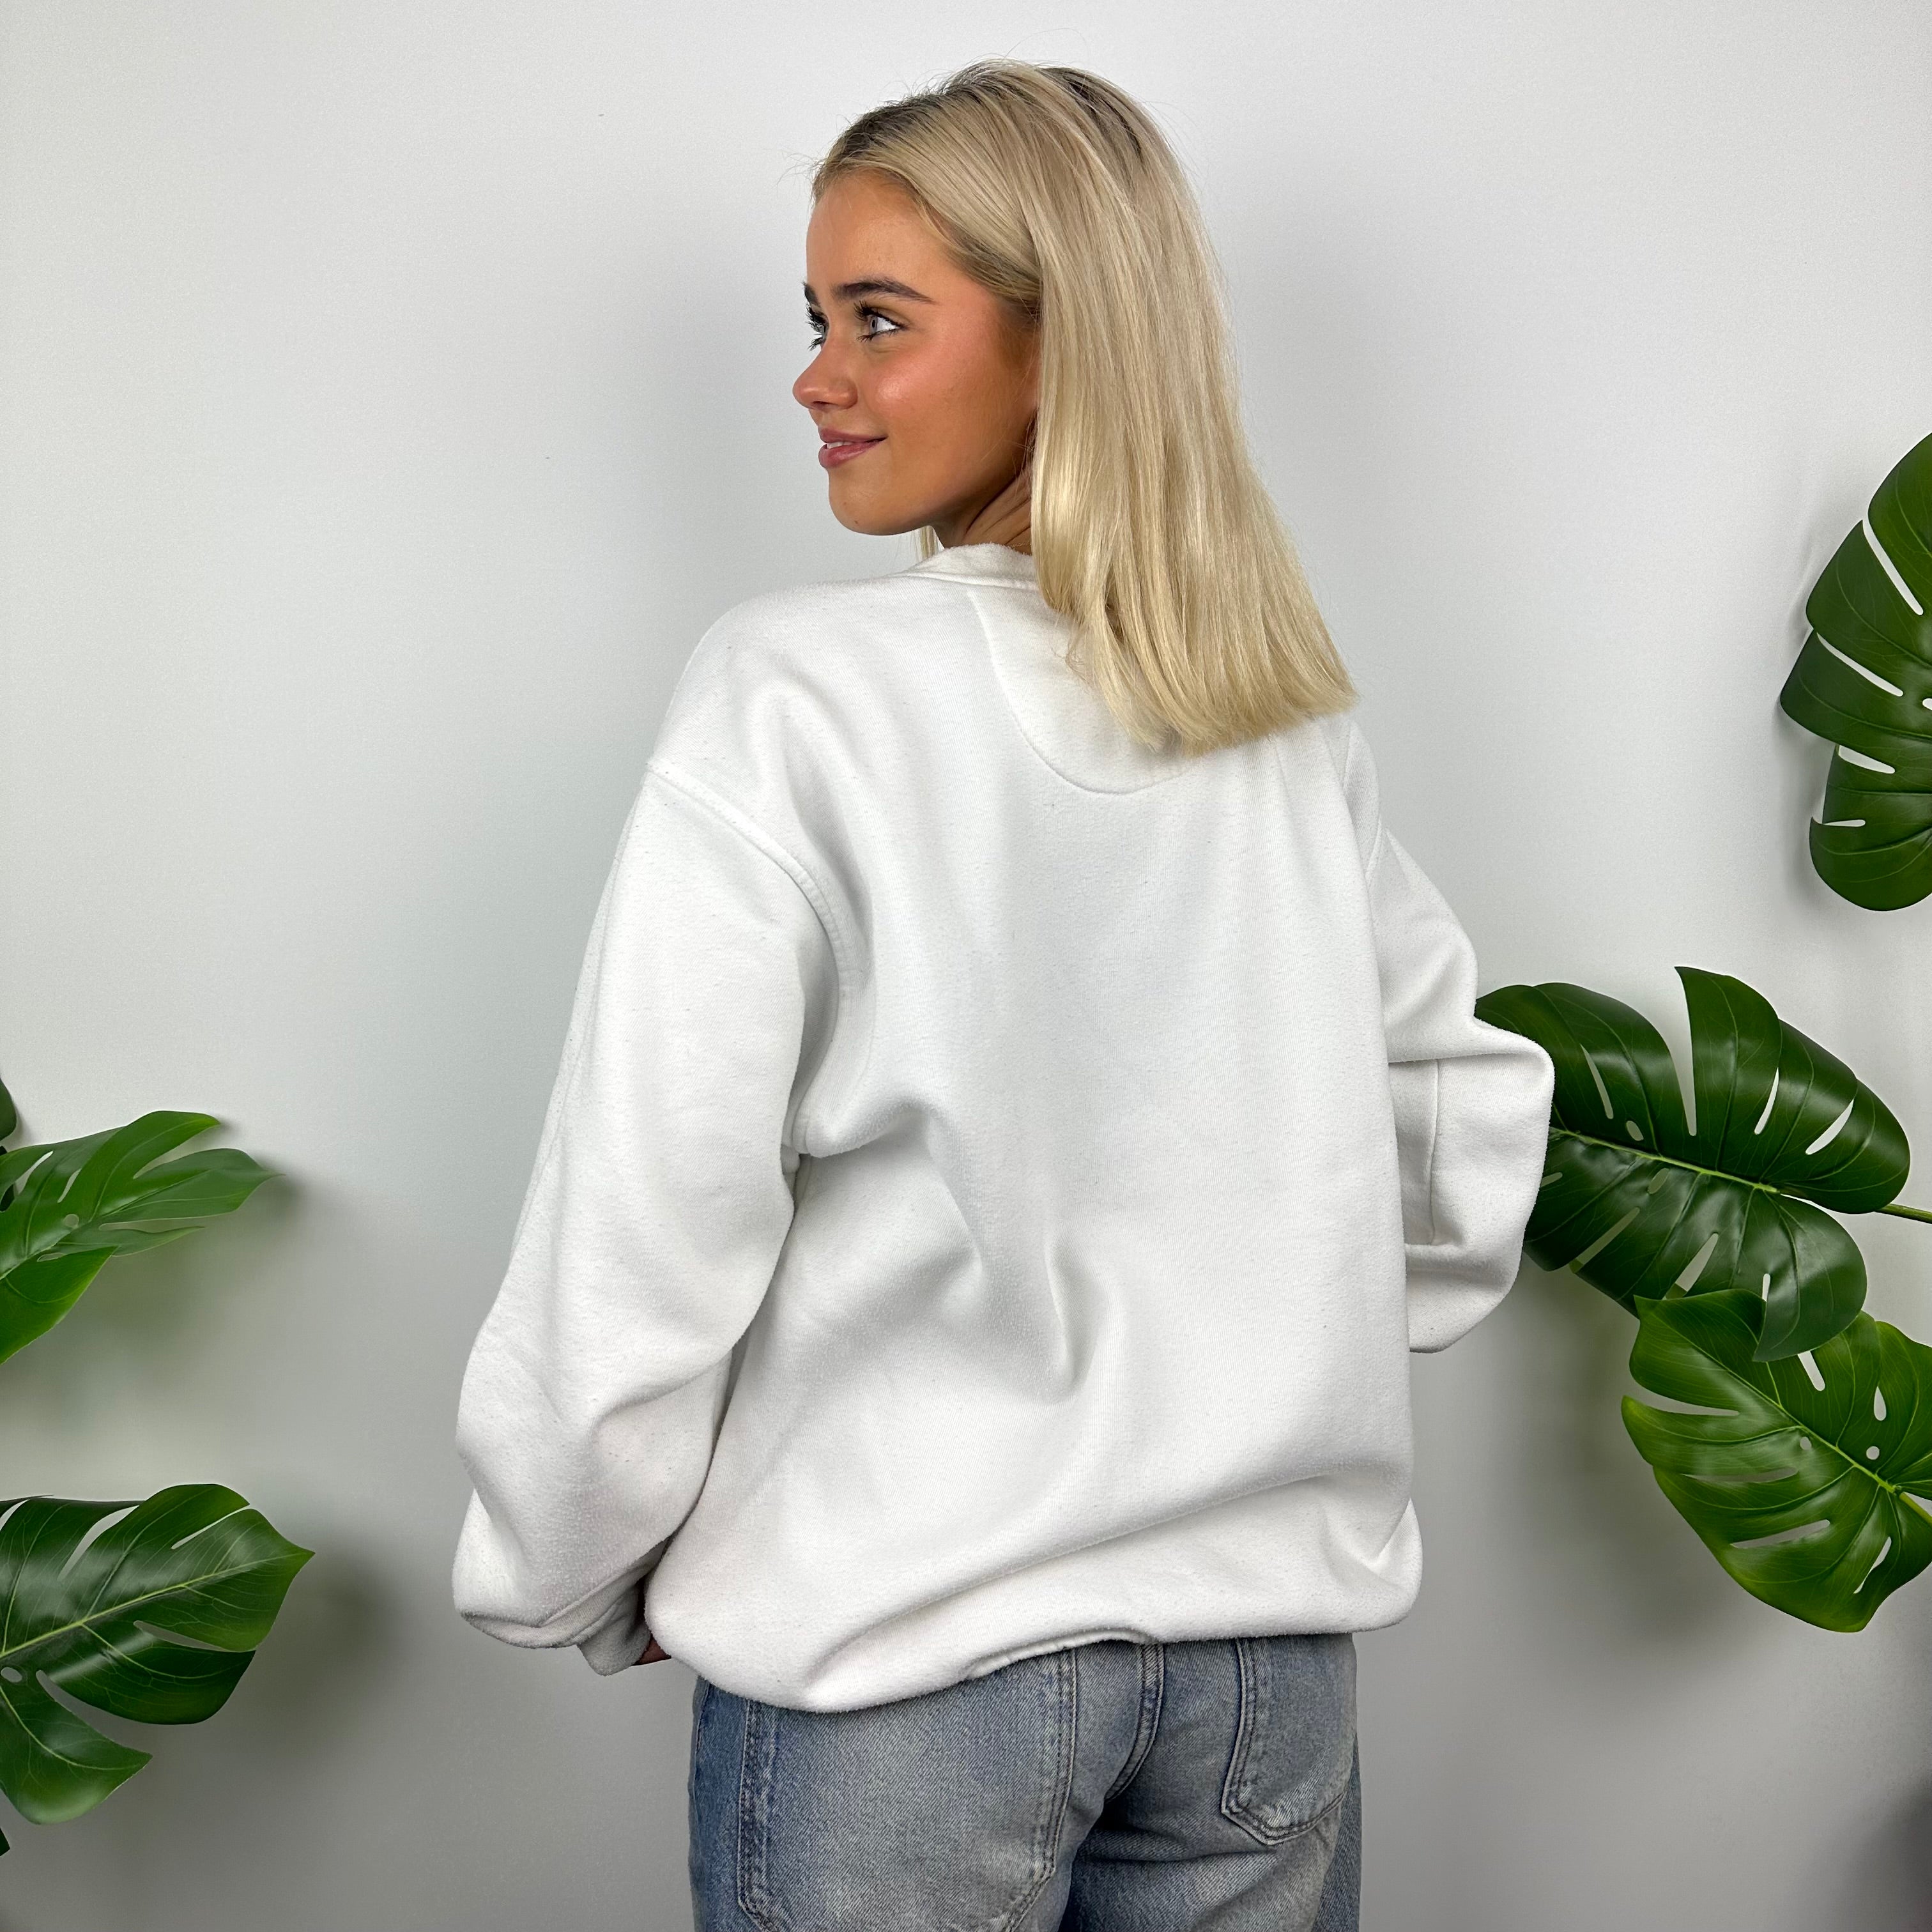 Nike White Embroidered Spell Out Sweatshirt (L)